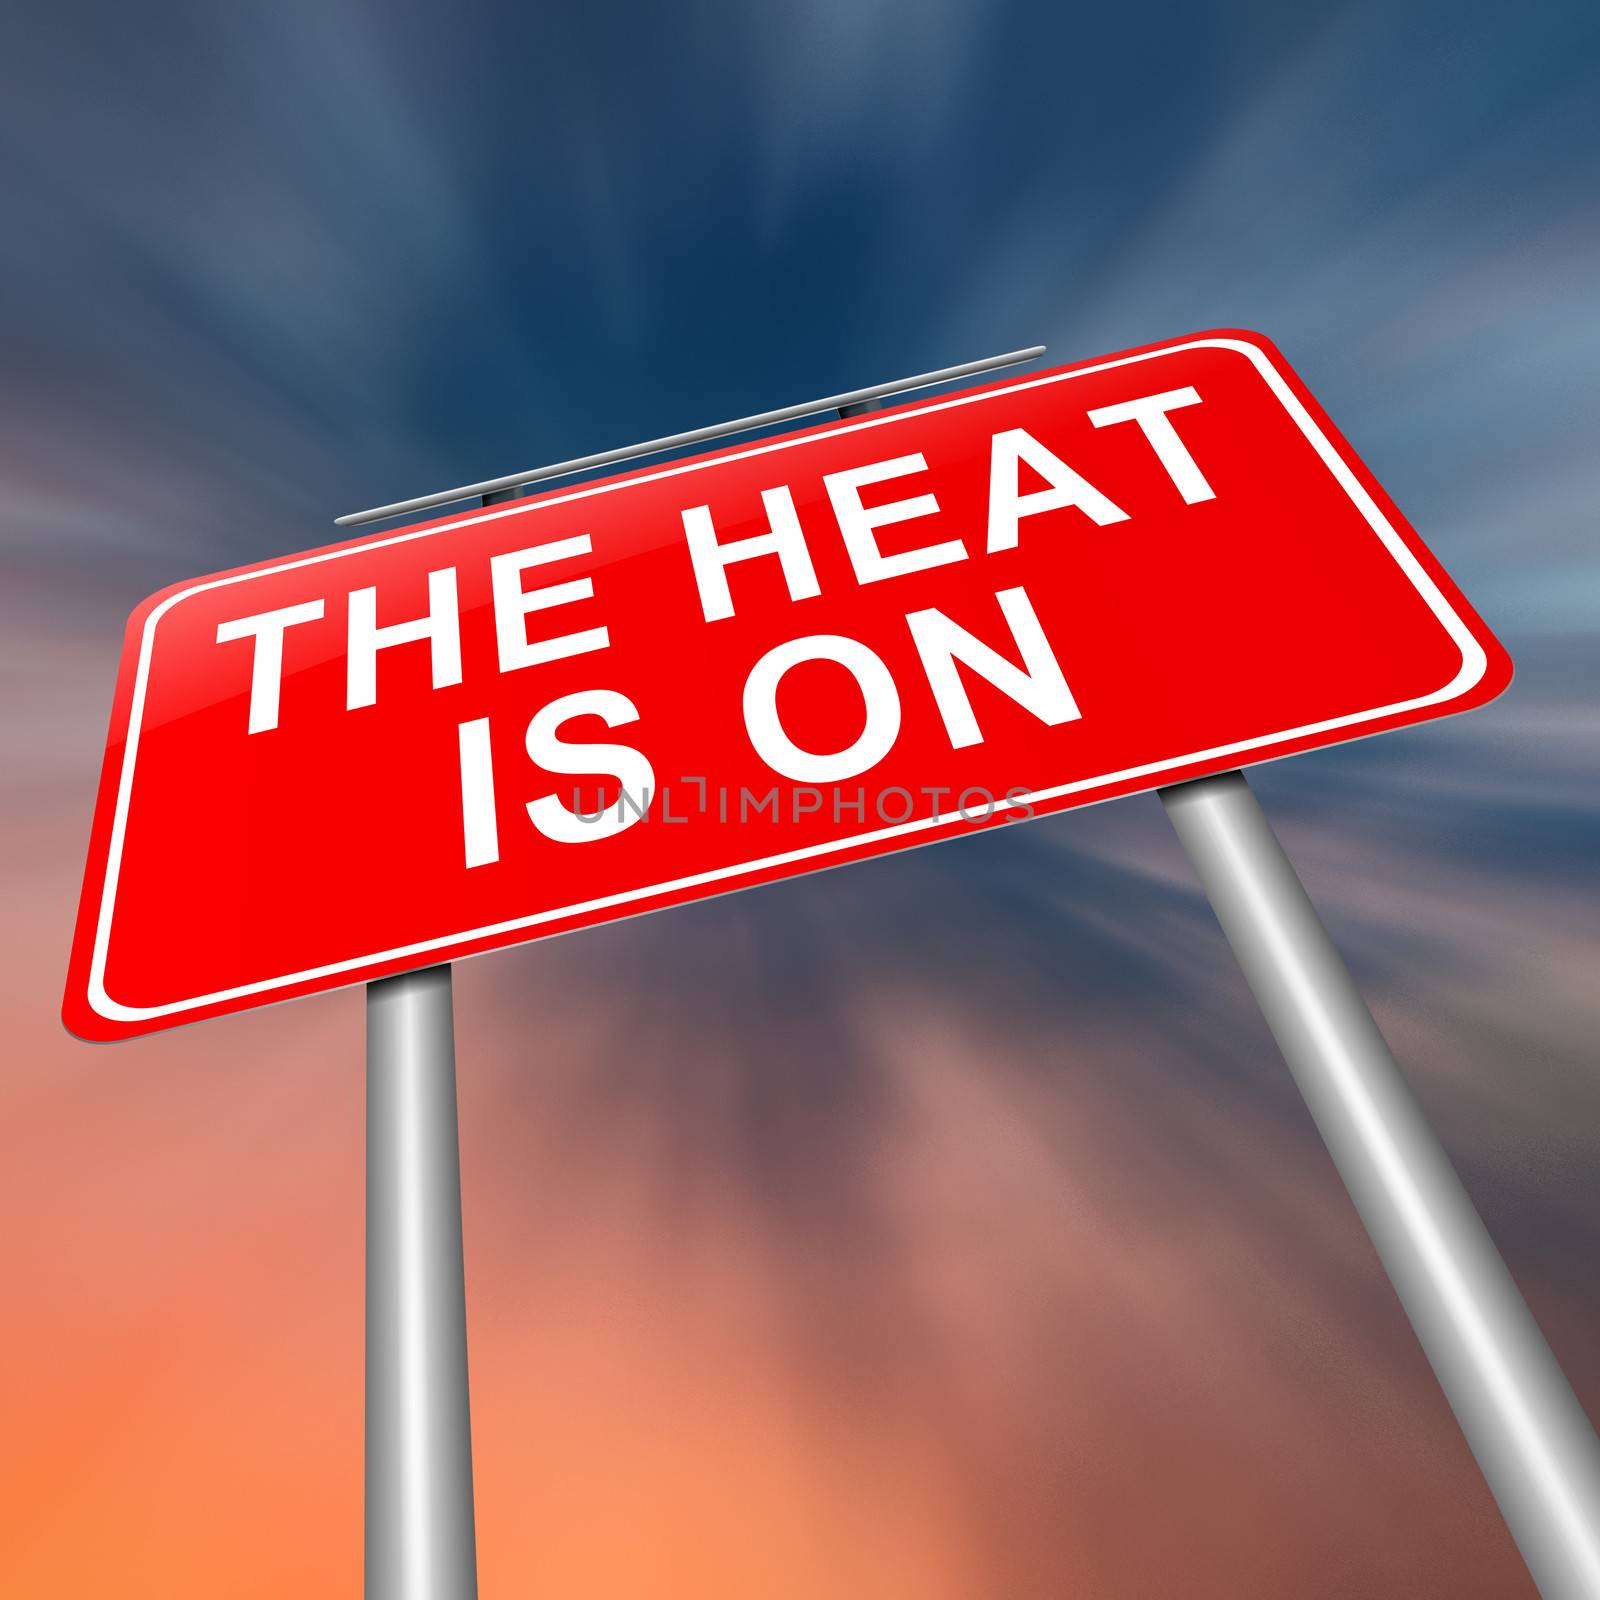 Illustration depicting a sign with a heat is on concept.